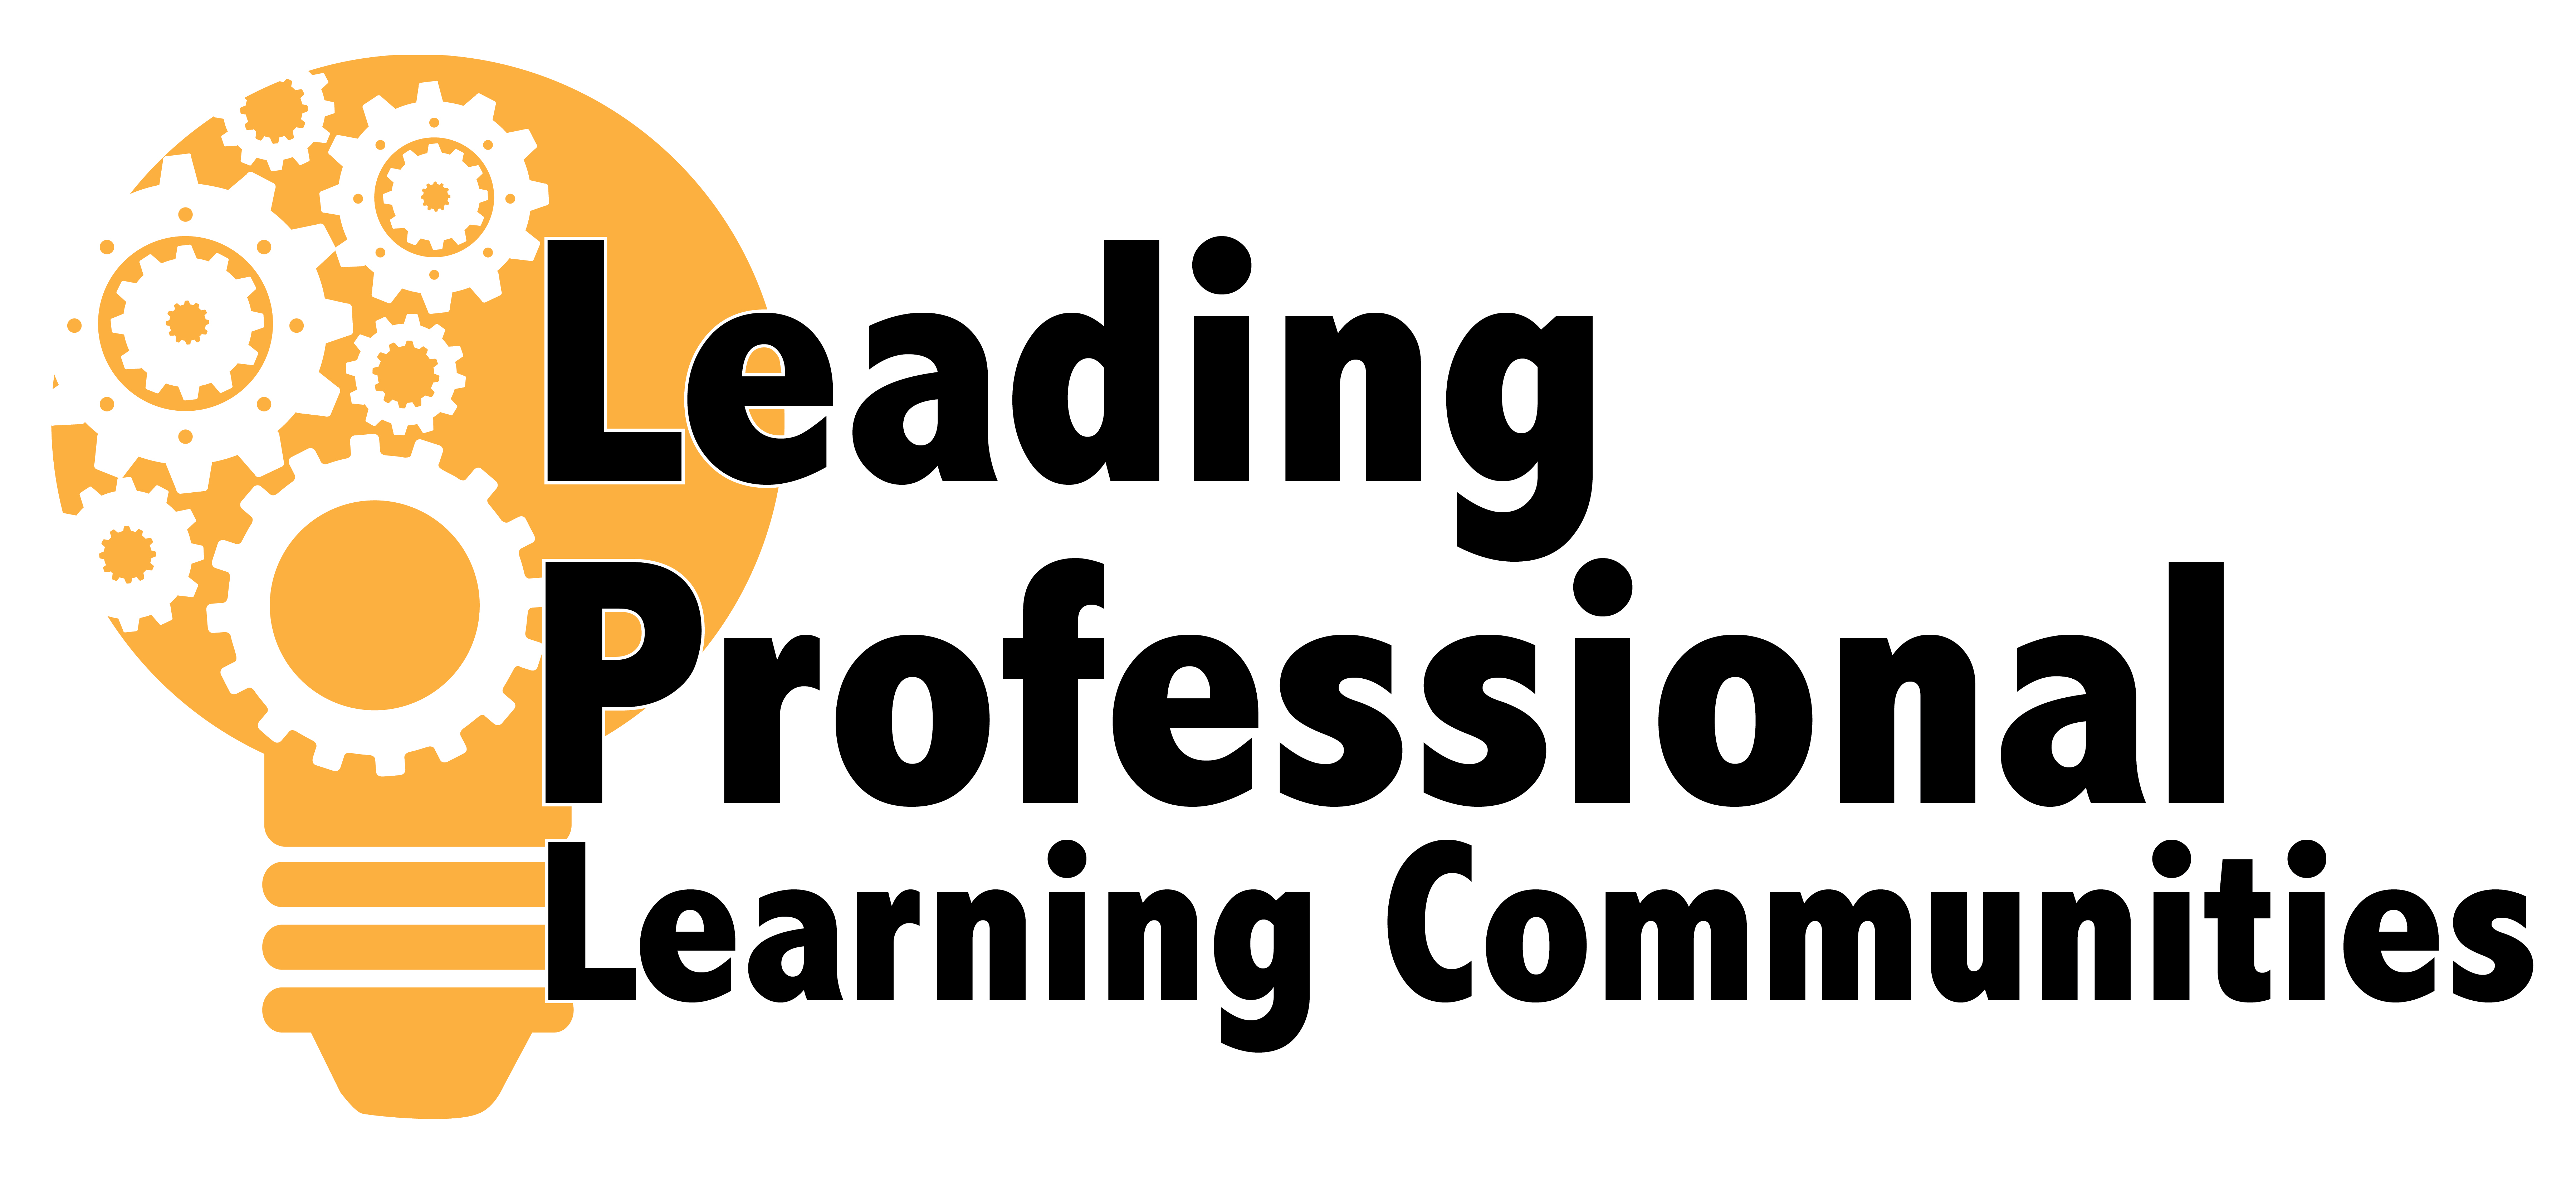 Professional Learning Communities Logo. It is a title and light bulb